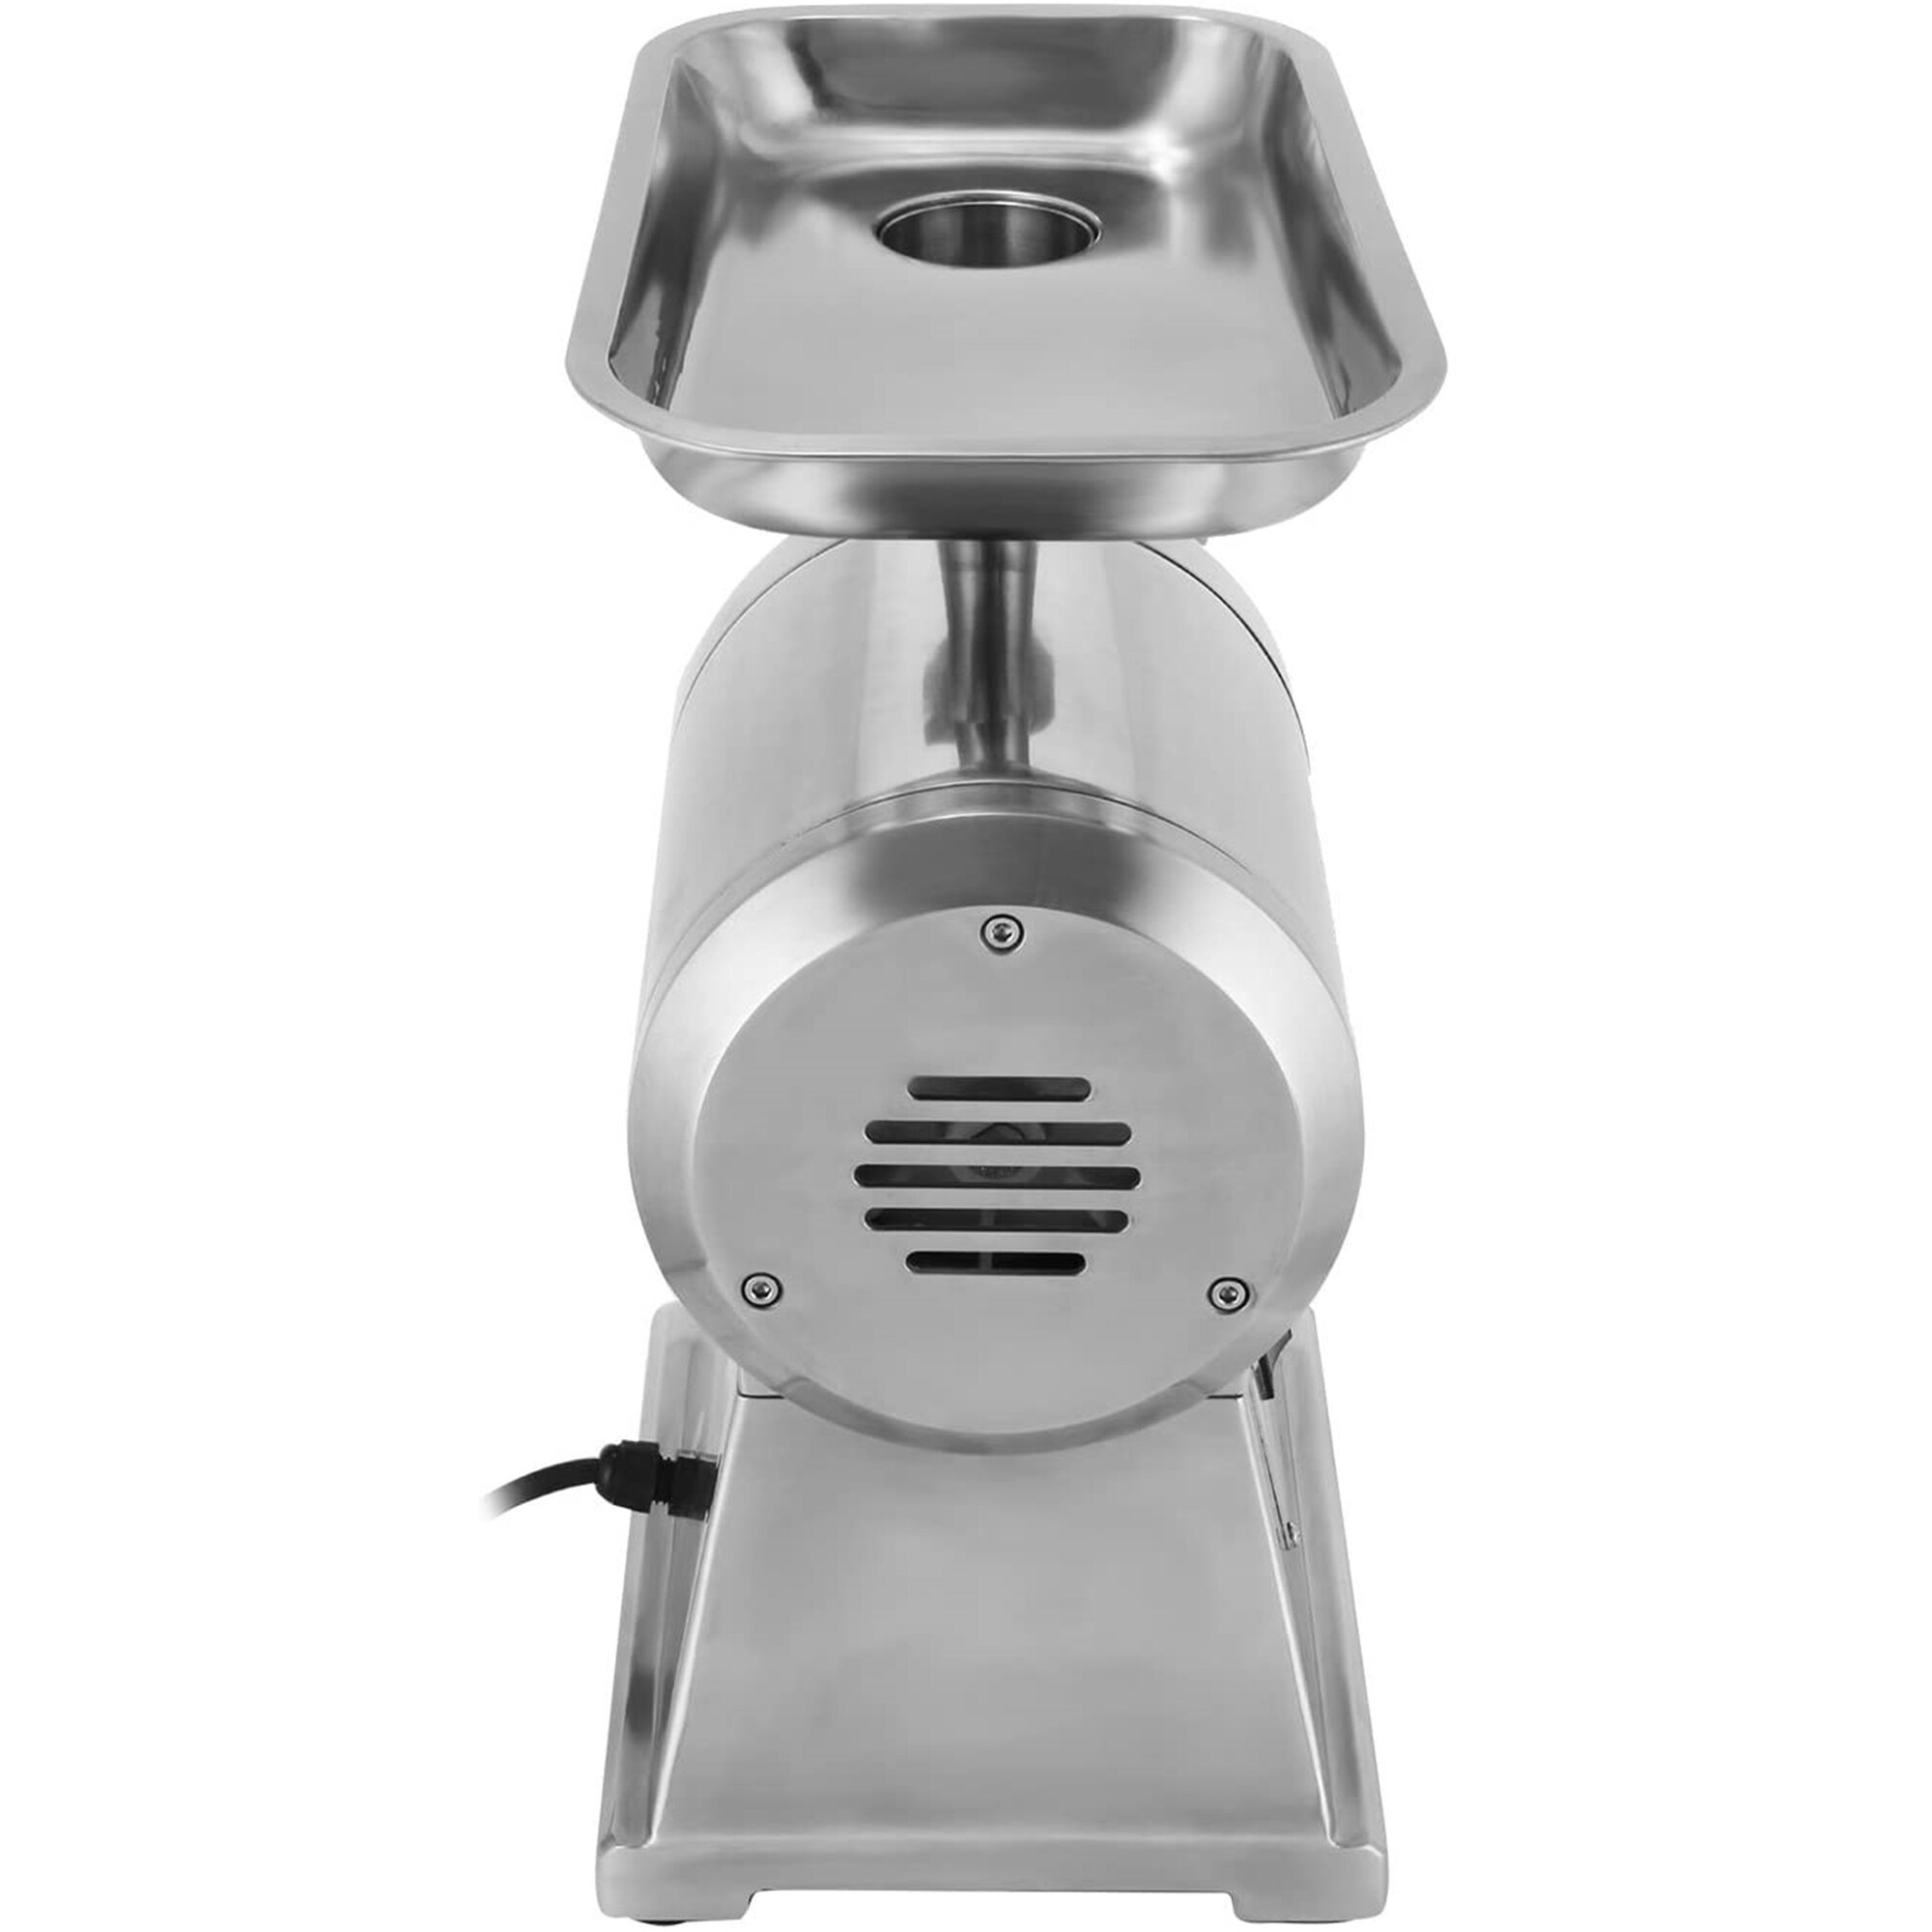 Electric Meat Grinder Home Kitchen Industrial Stainless Steel Sausage Maker  2L - M - Bed Bath & Beyond - 22985182